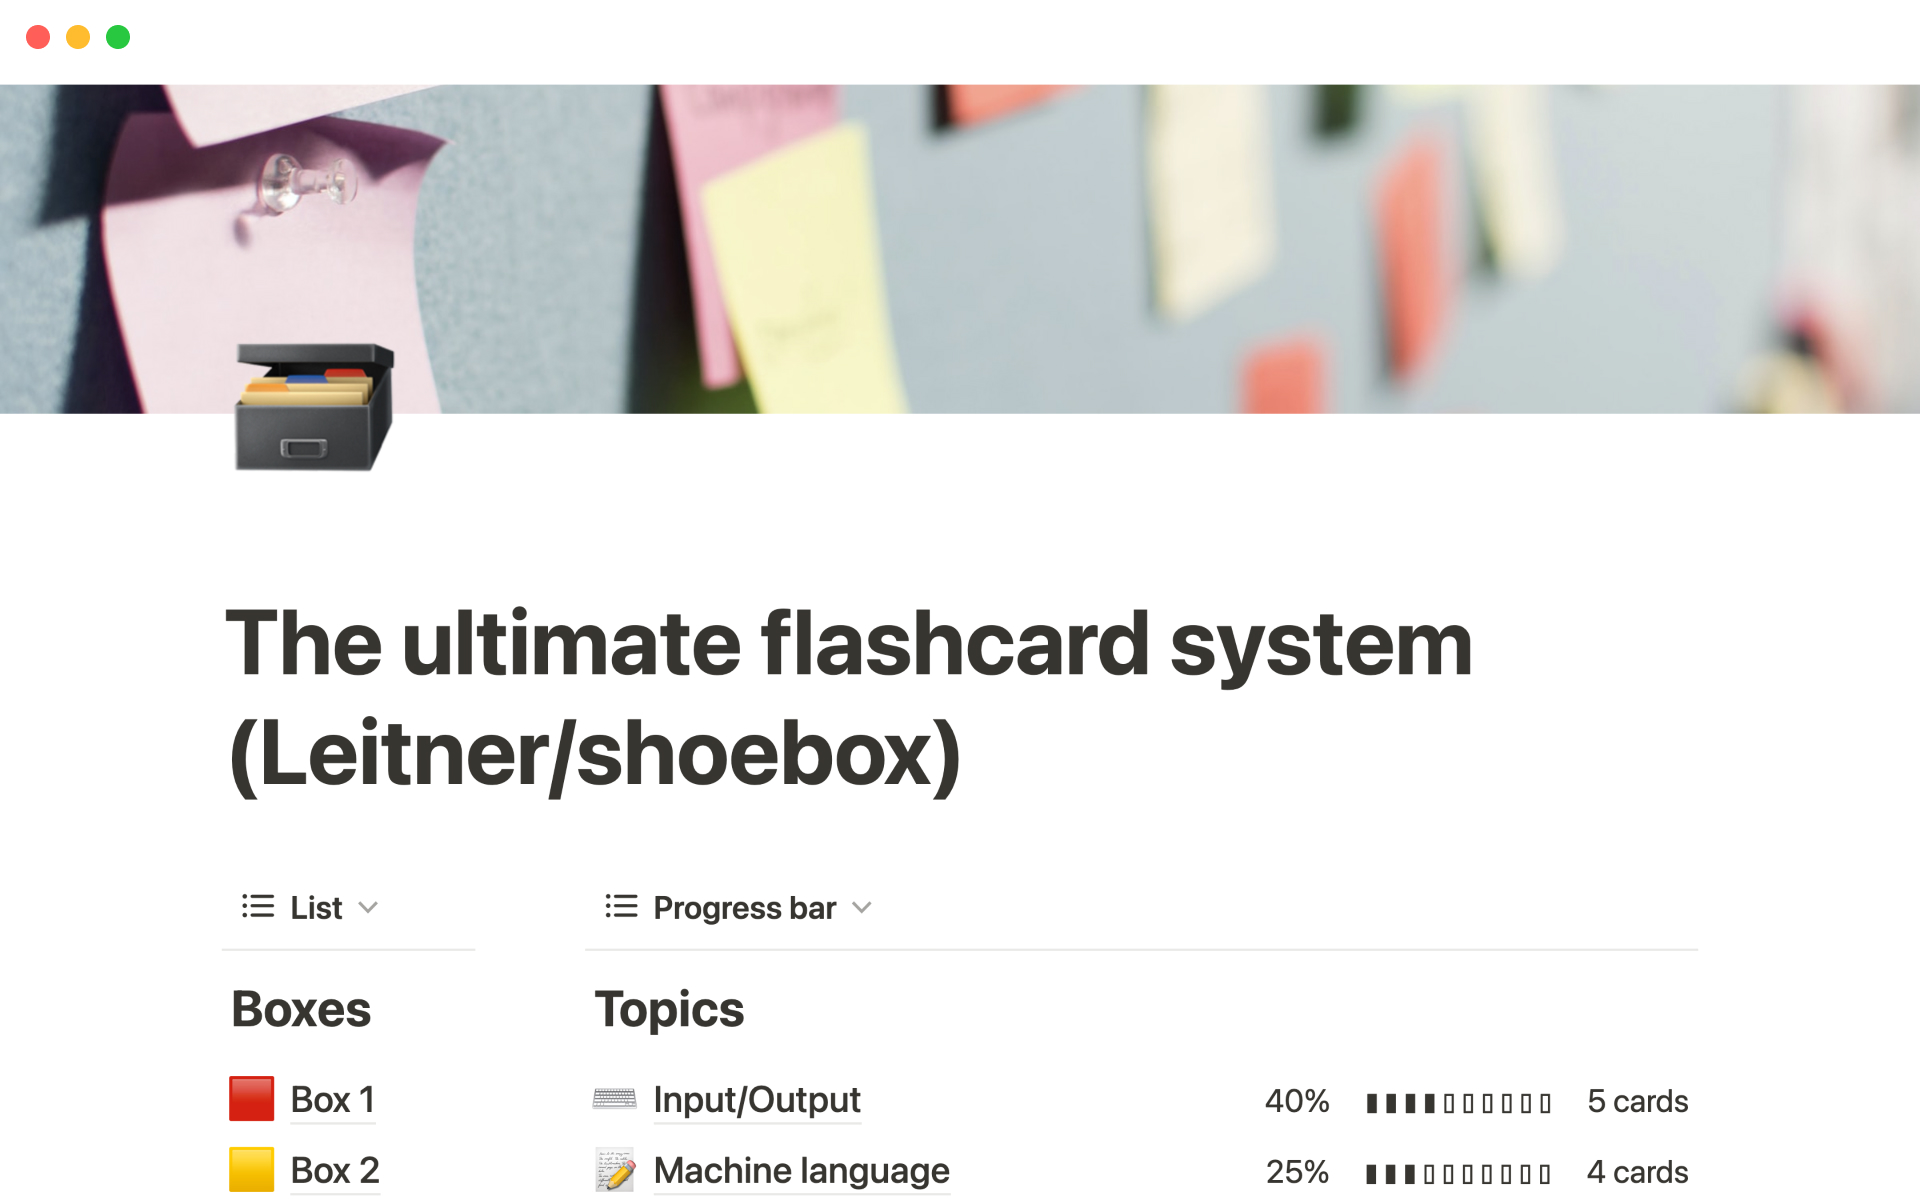 The ultimate flashcard system